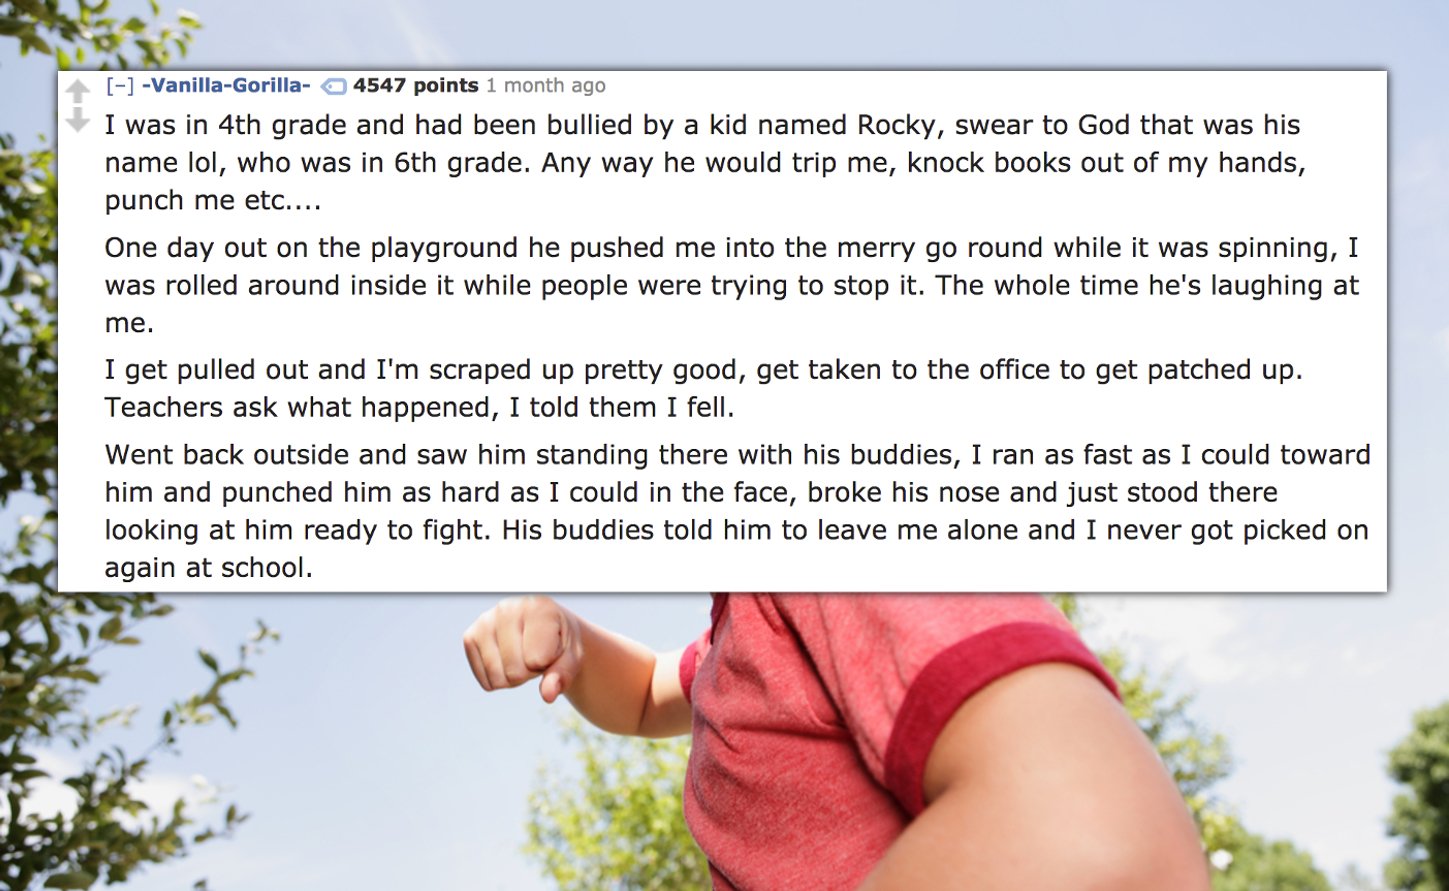 schoolyard bully - VanillaGorilla 4547 points 1 month ago I was in 4th grade and had been bullied by a kid named Rocky, swear to God that was his name lol, who was in 6th grade. Any way he would trip me, knock books out of my hands, punch me etc.... One d